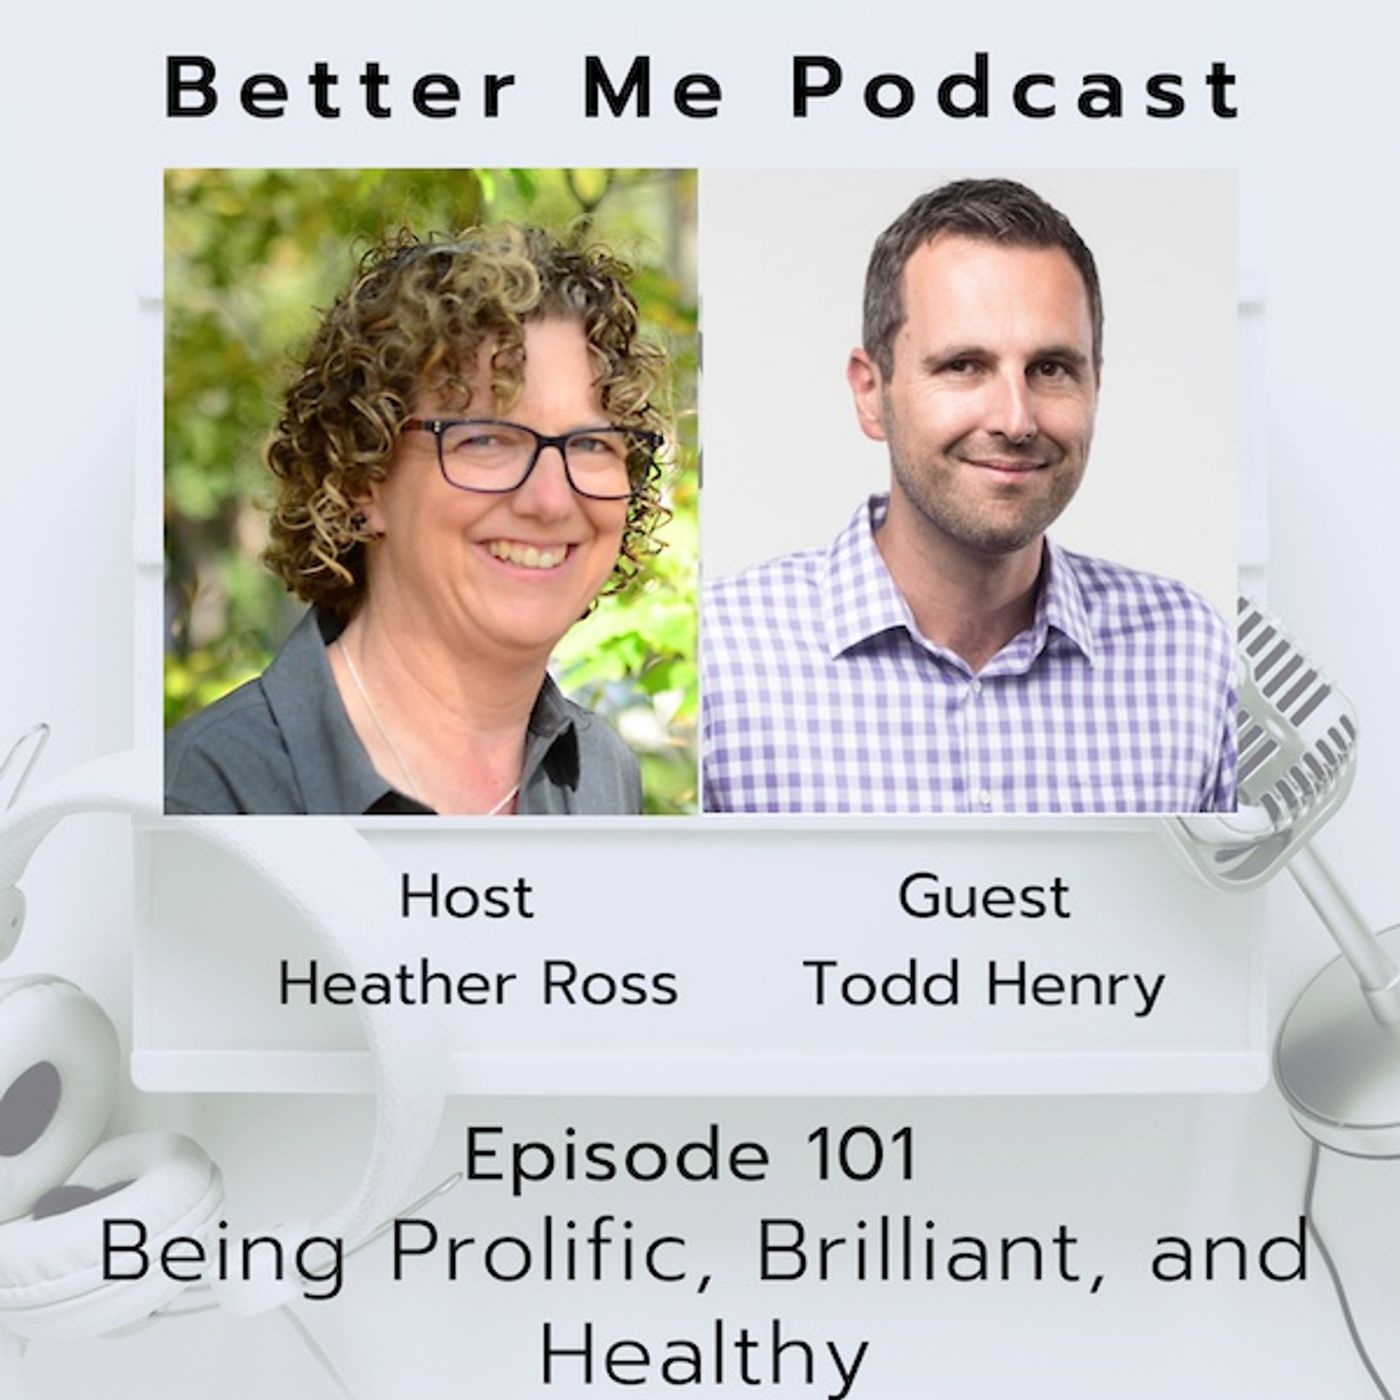 EP 101 Being Prolific, Brilliant, and Healthy (with guest Todd Henry)